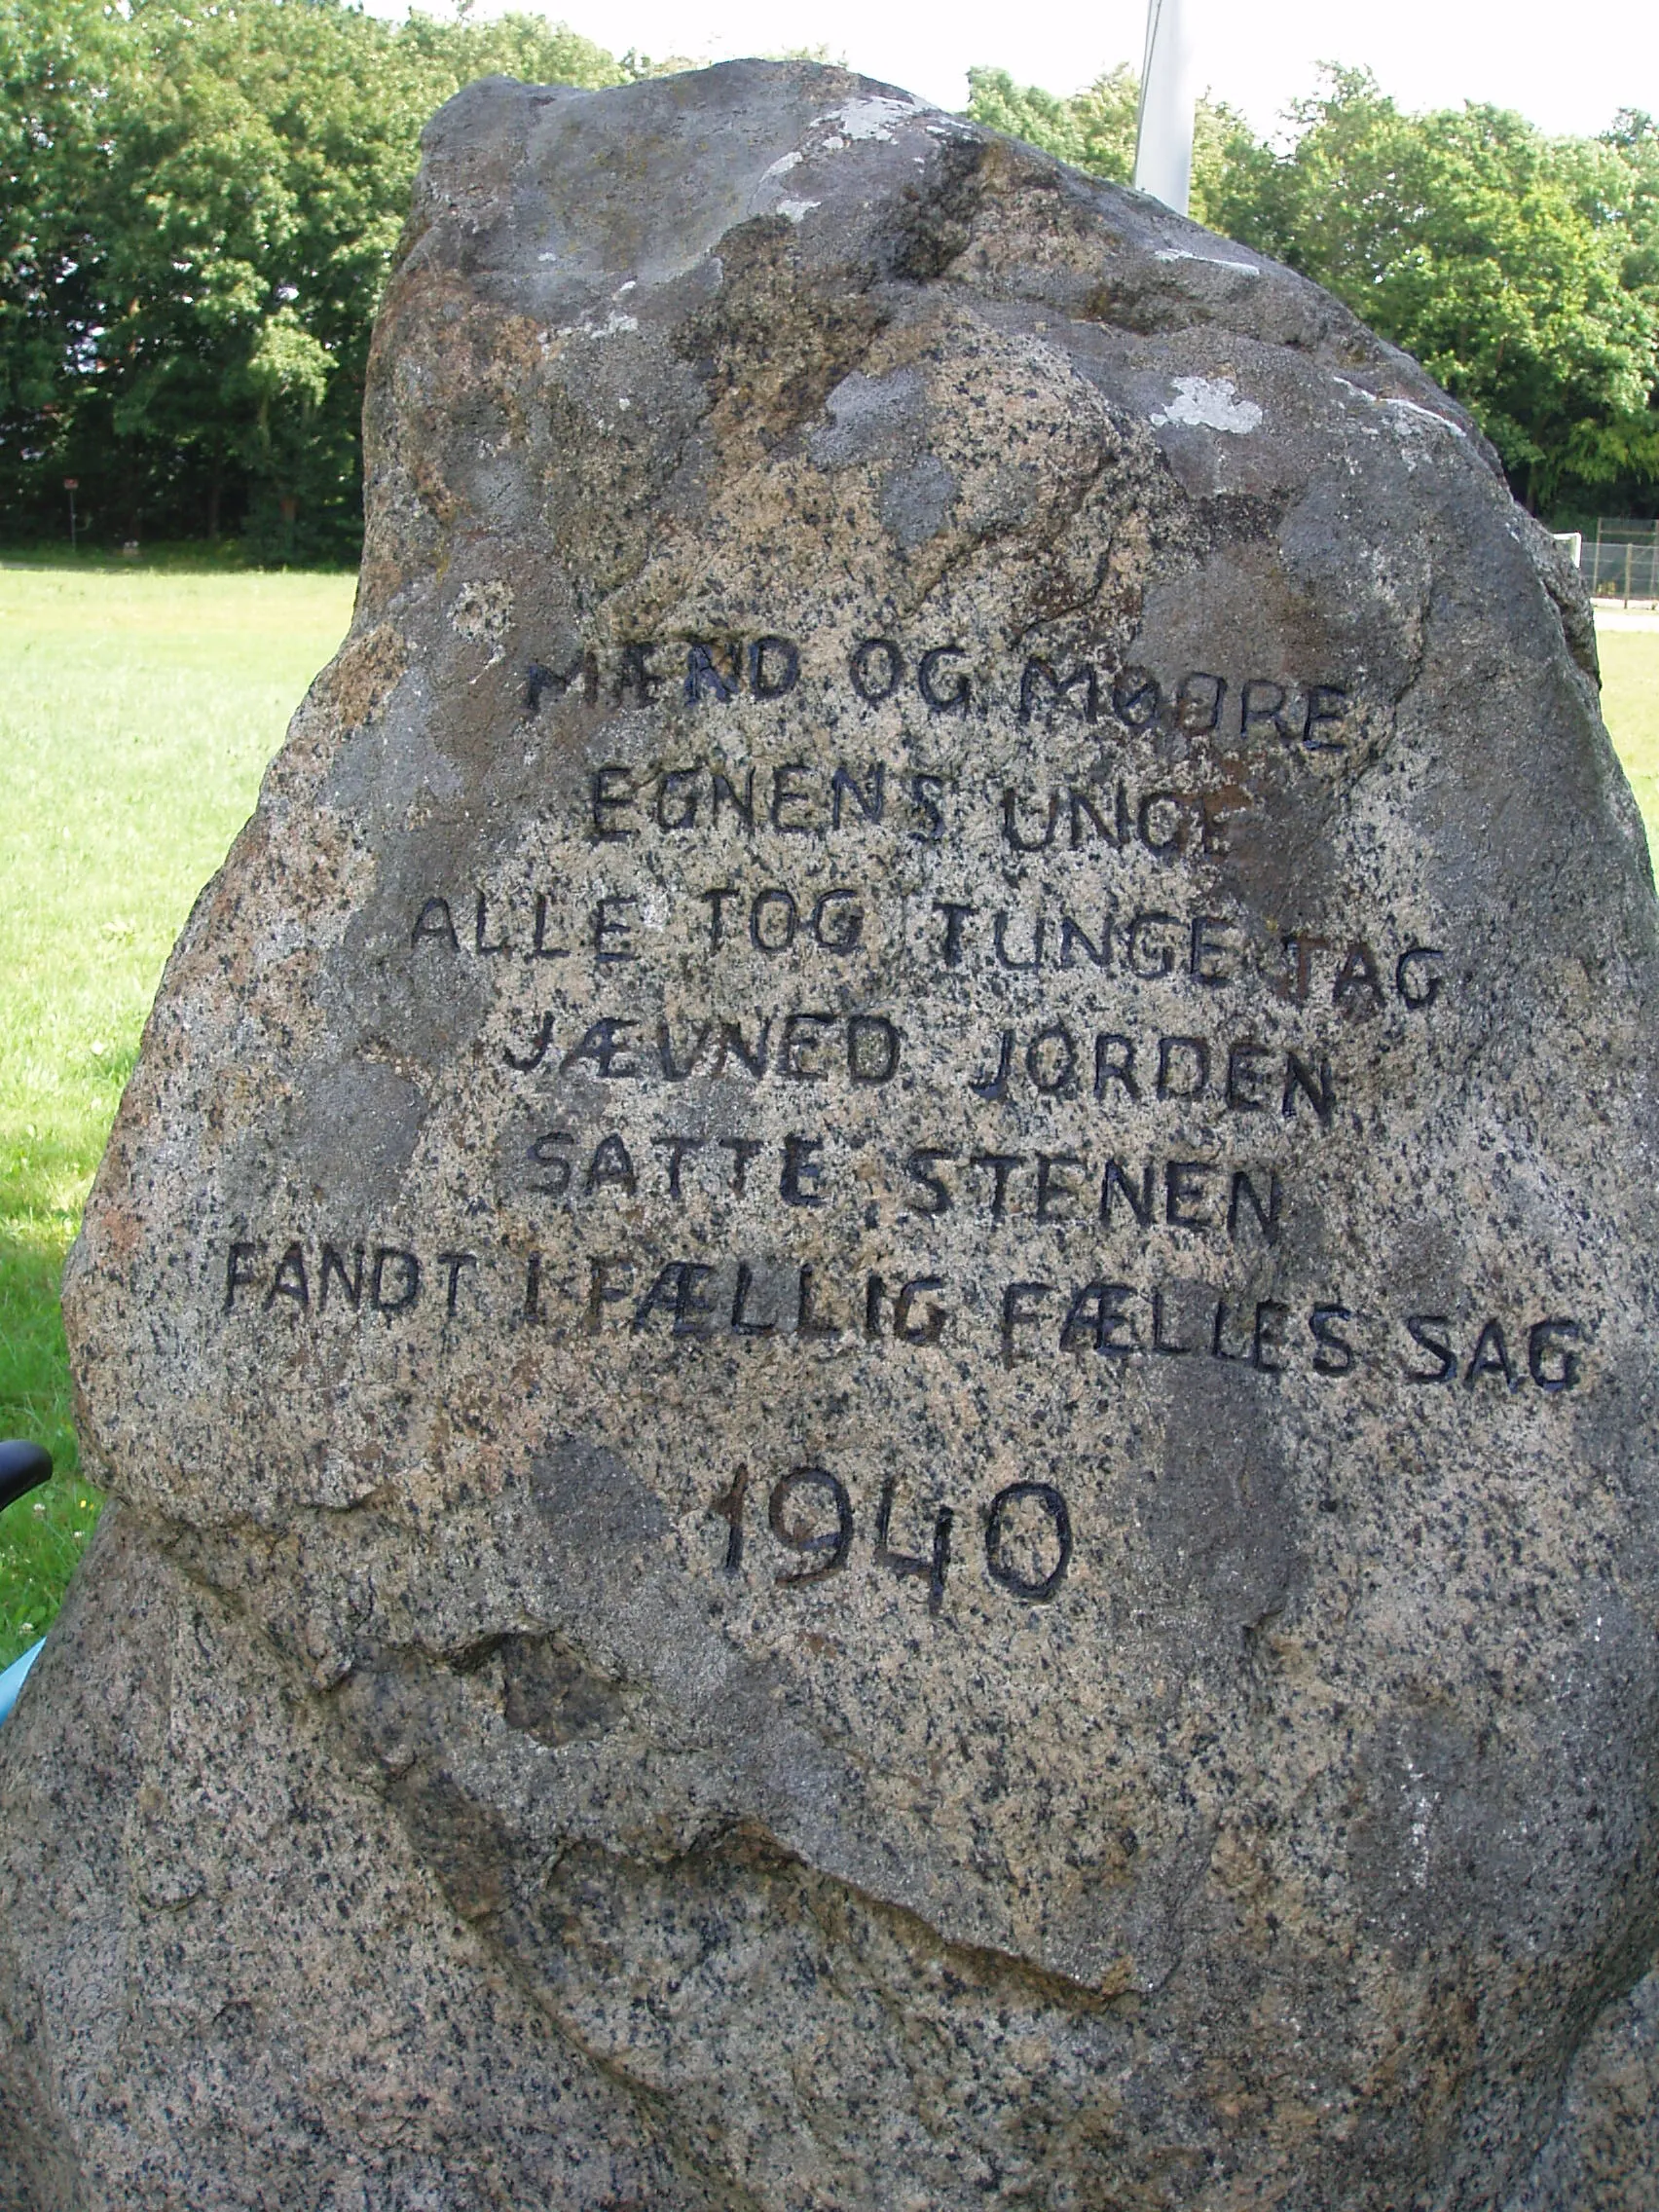 Photo showing: Monument for the creation af the sports ground in 1940 at Todbjerg village, Denmark